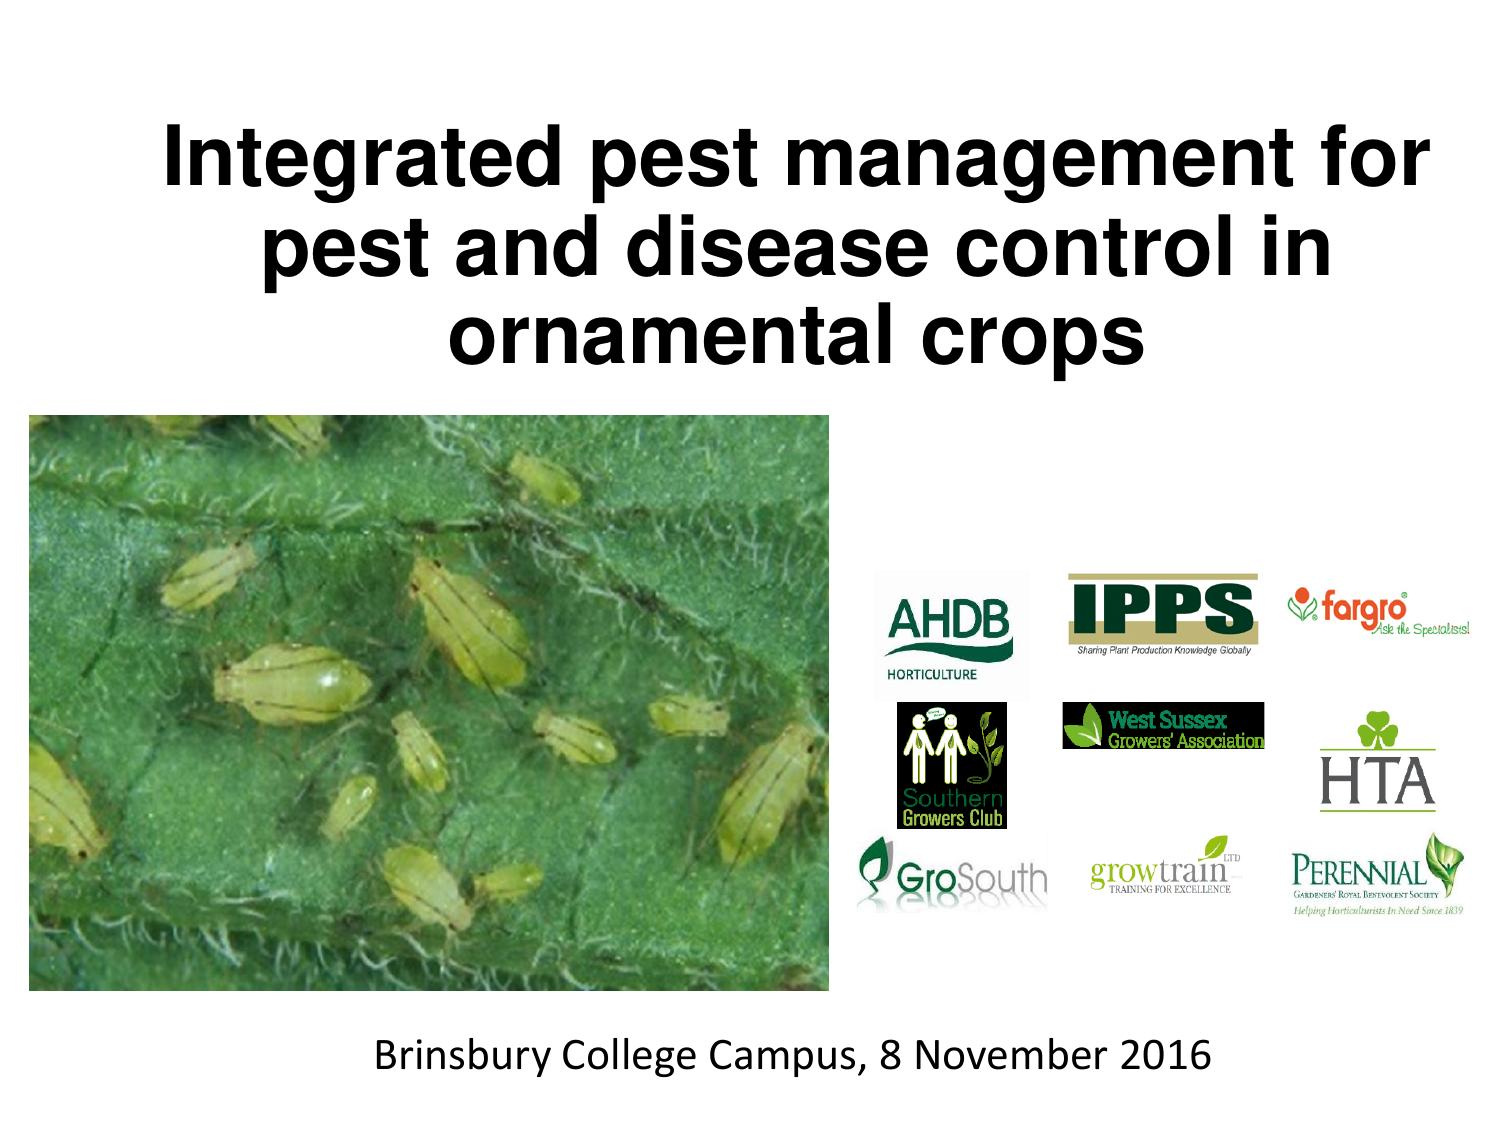 Integrated pest management for pest and disease control in ornamental crops